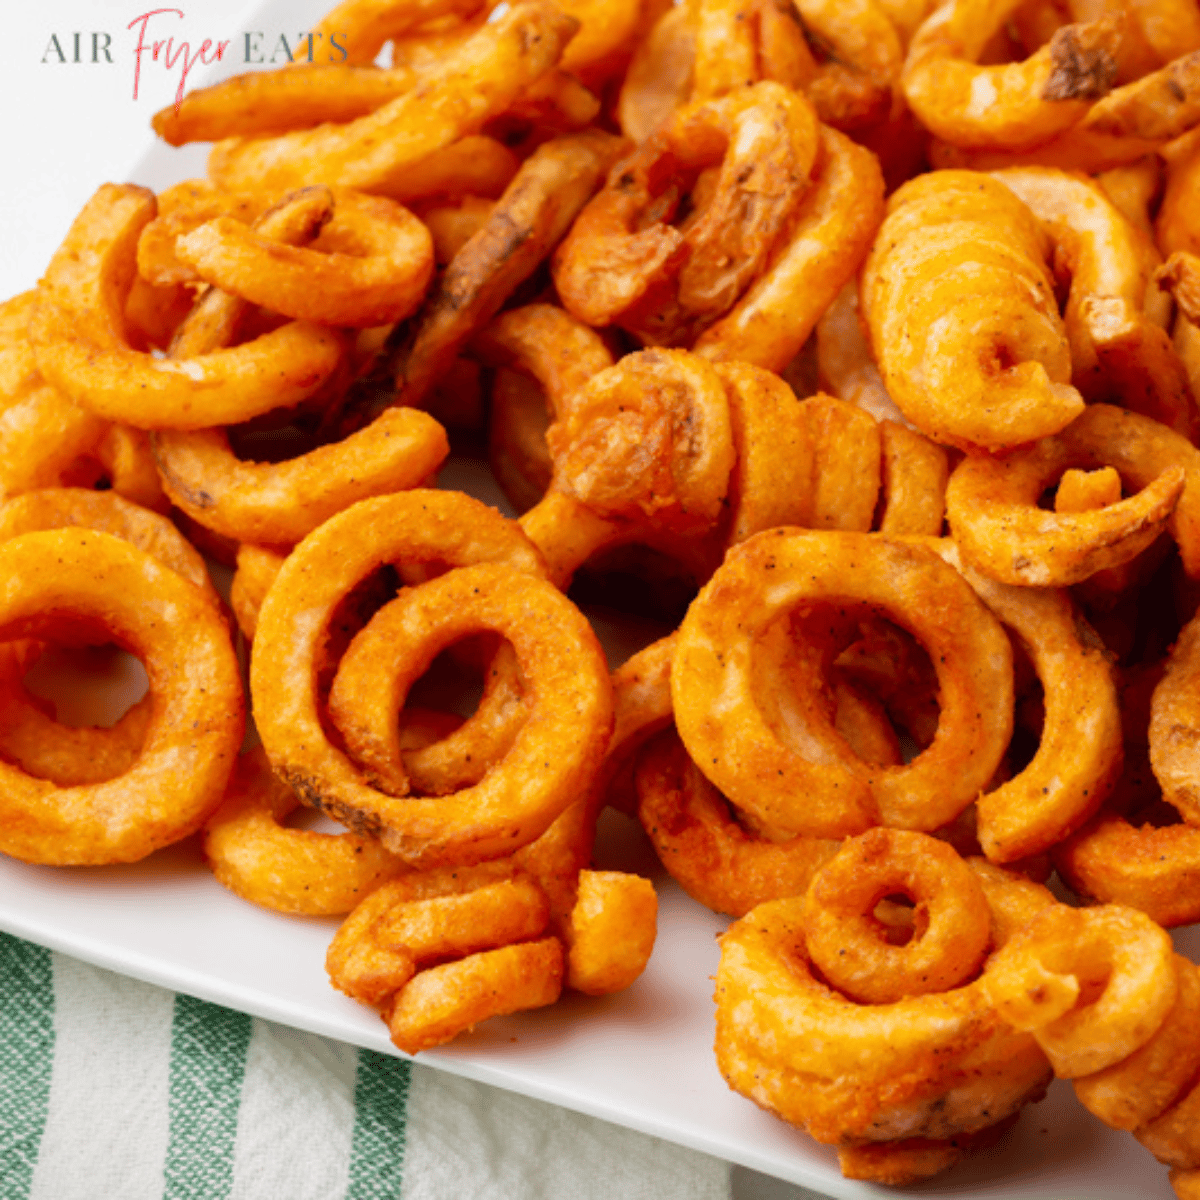 How To Cook Frozen Curly Fries In Air Fryer France, SAVE 30% | lupon.gov.ph